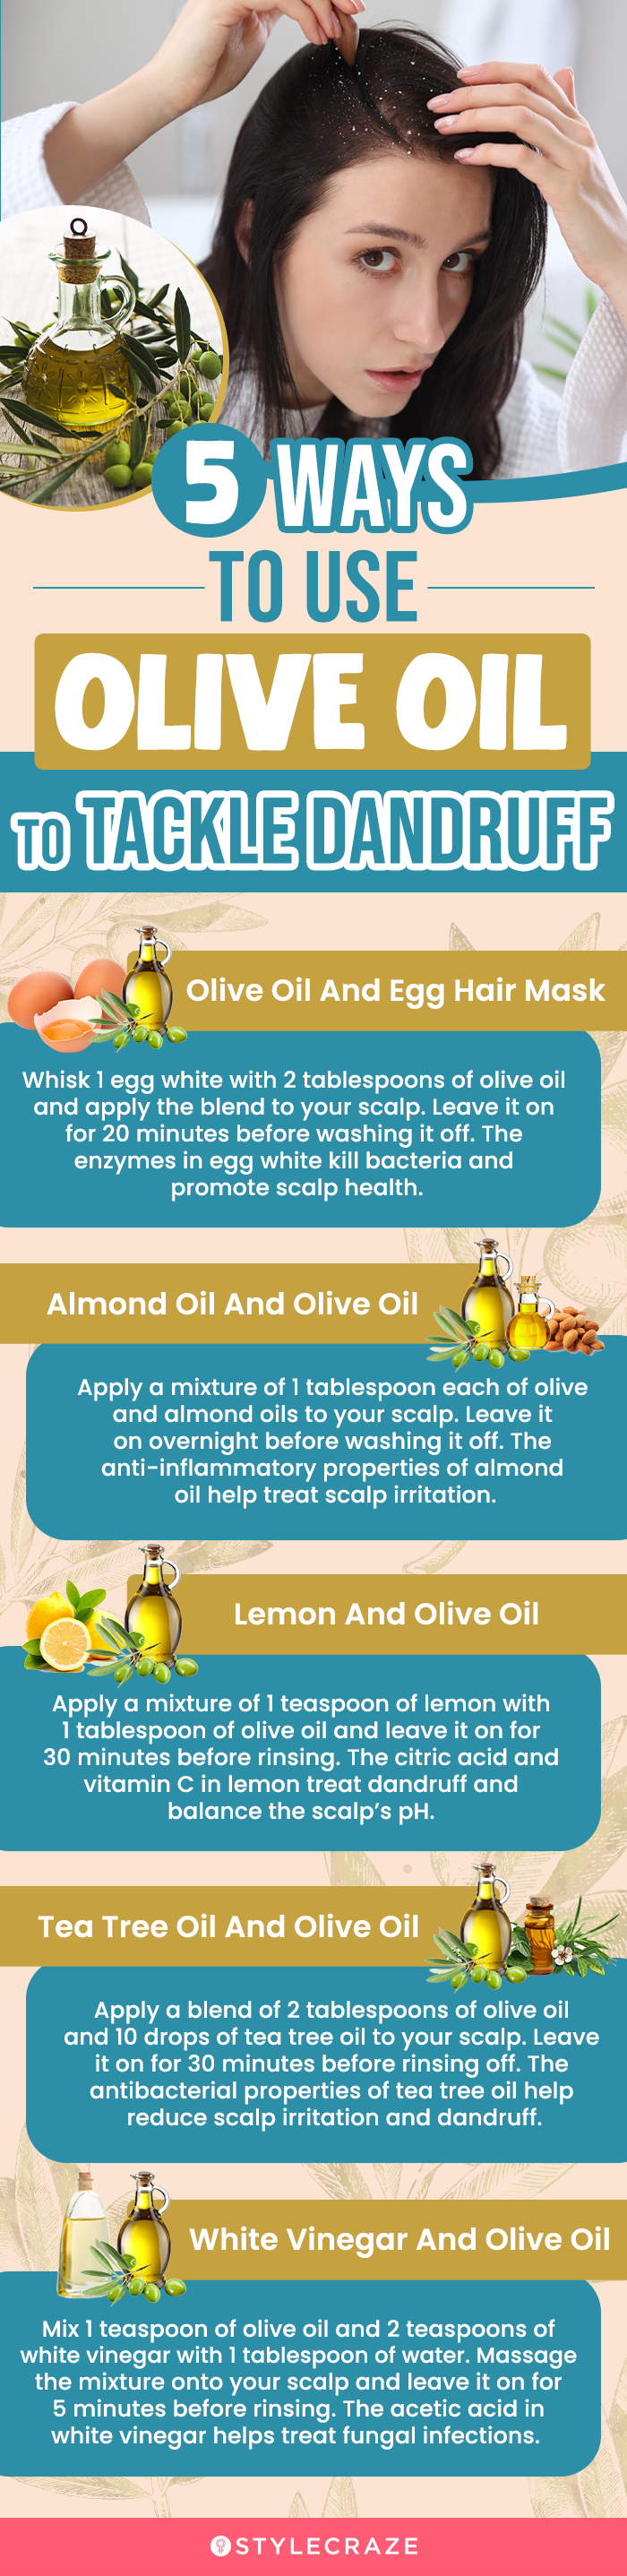 5 ways to use olive oil to tackle dandruff (infographic)